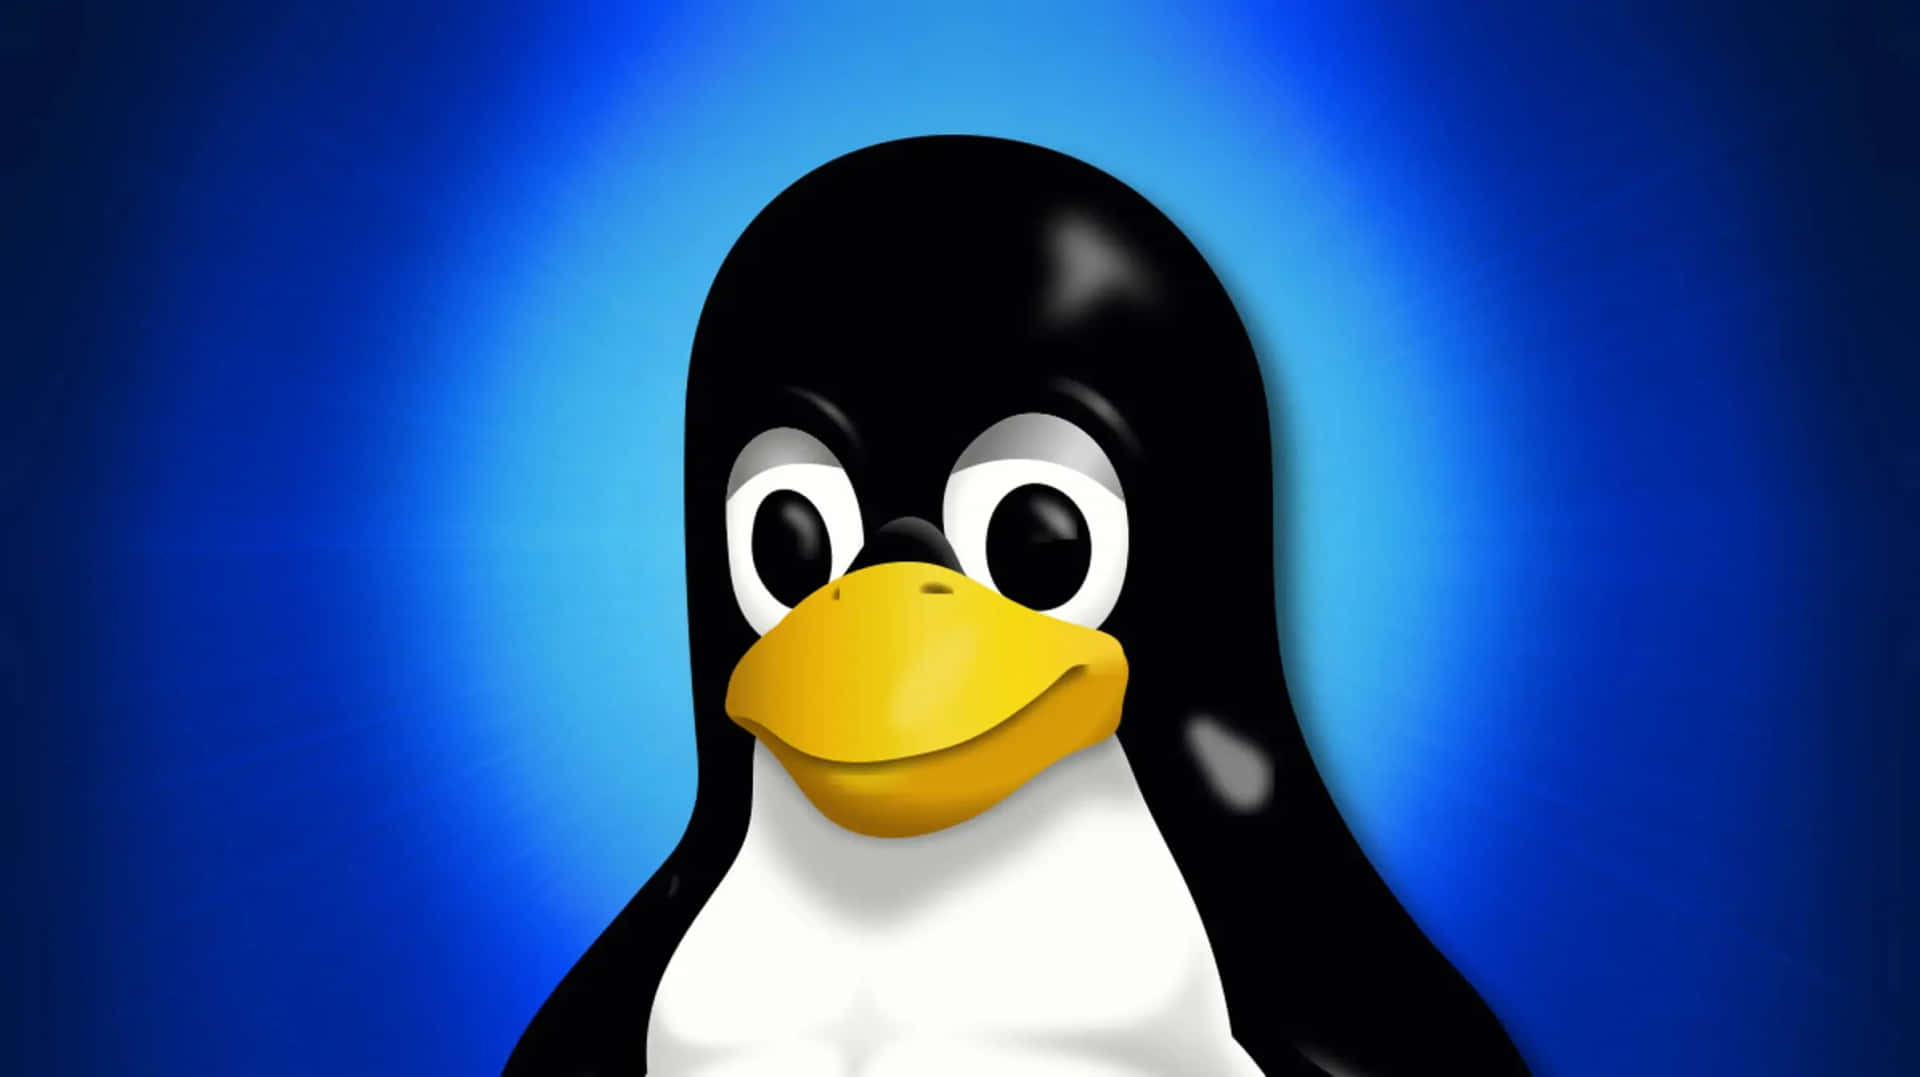 "The World of Linux"